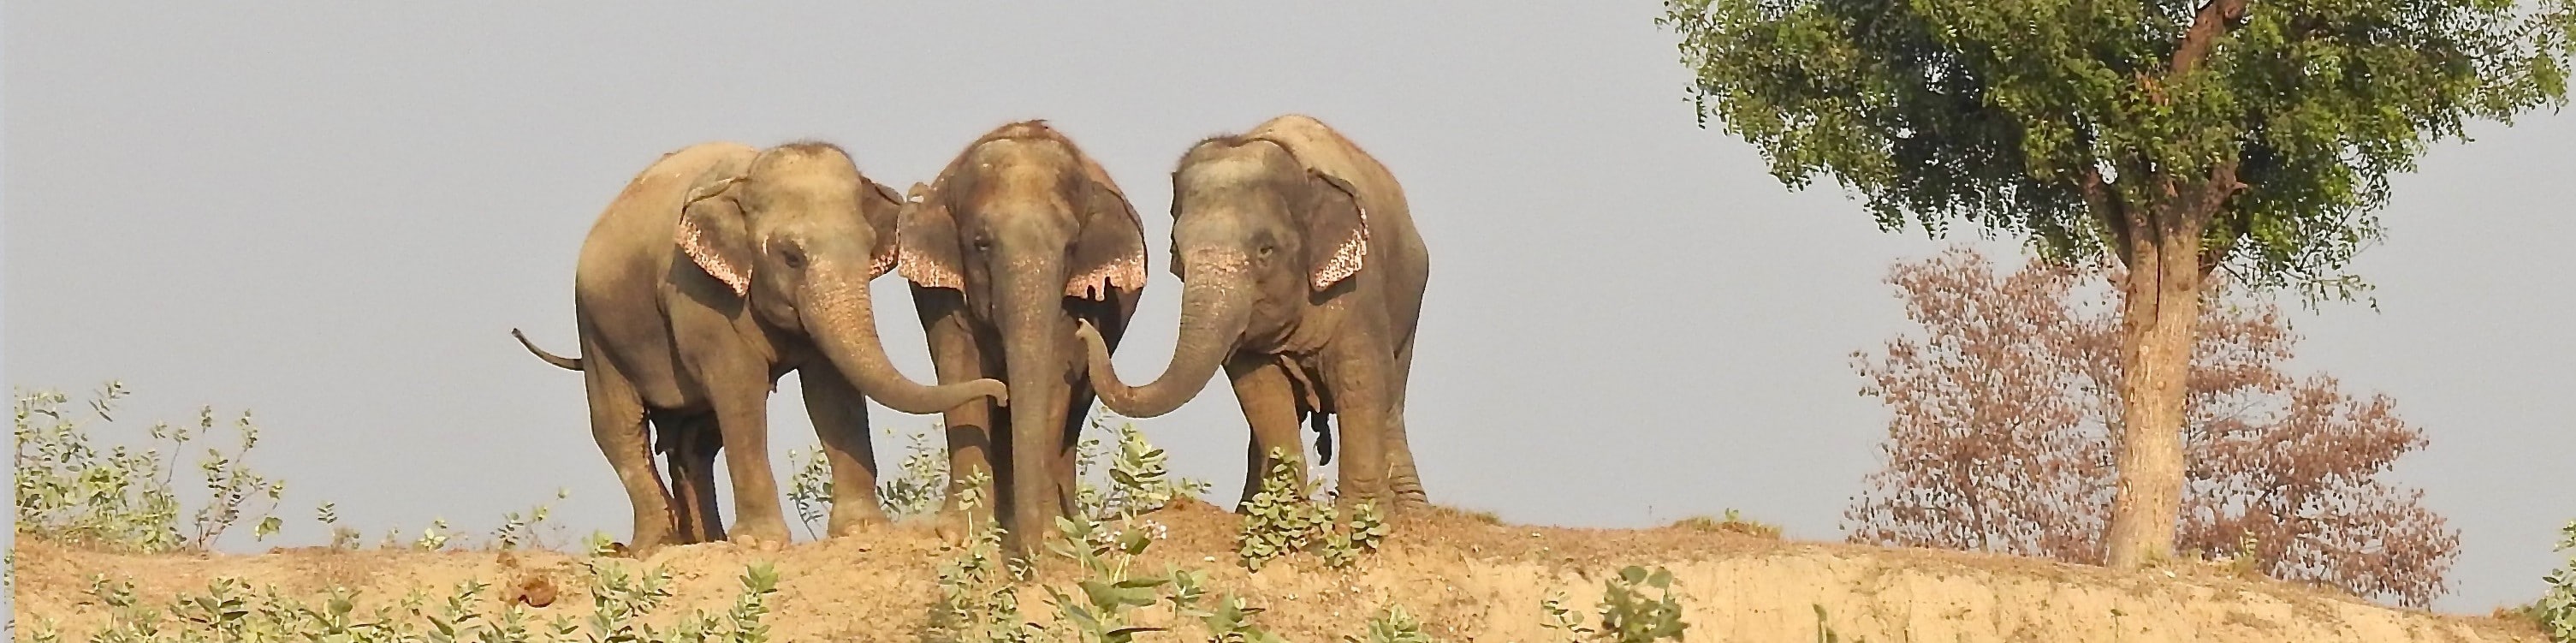 A new life for abused elephants at Wildlife SOS, India